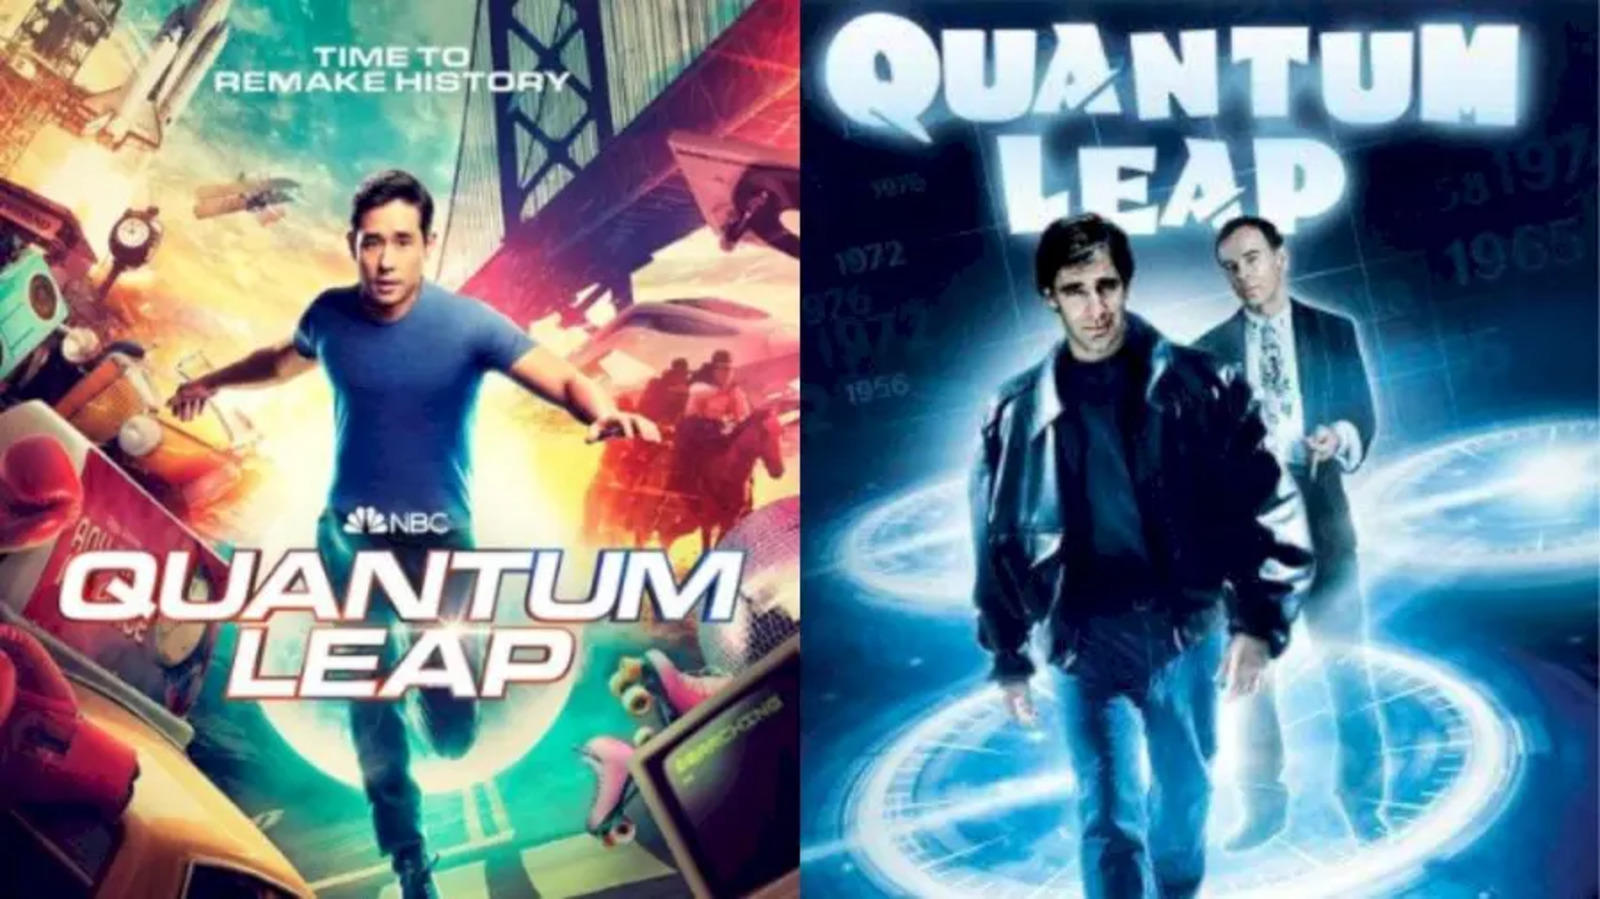 Quantum Leap season 1 episode 16 on NBC: Release date, air time, promo,  plot, and more